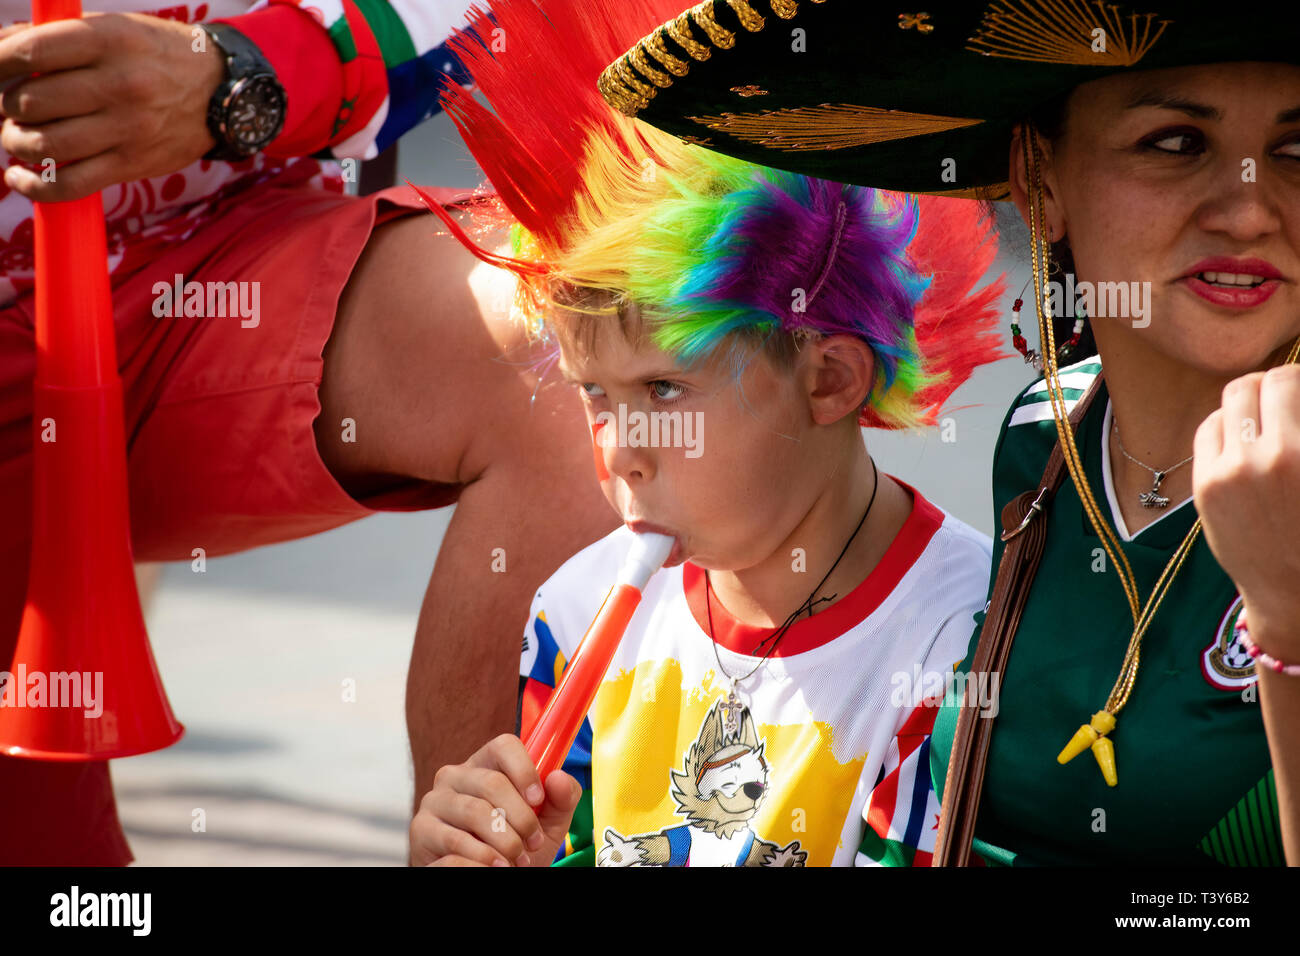 Boy in Swedish football shirt wearing multi-coloured punk-style wig and blowing vuvuzela - FIFA World Cup Russia 2018 Mexico v Sweden, Ekaterinburg Stock Photo